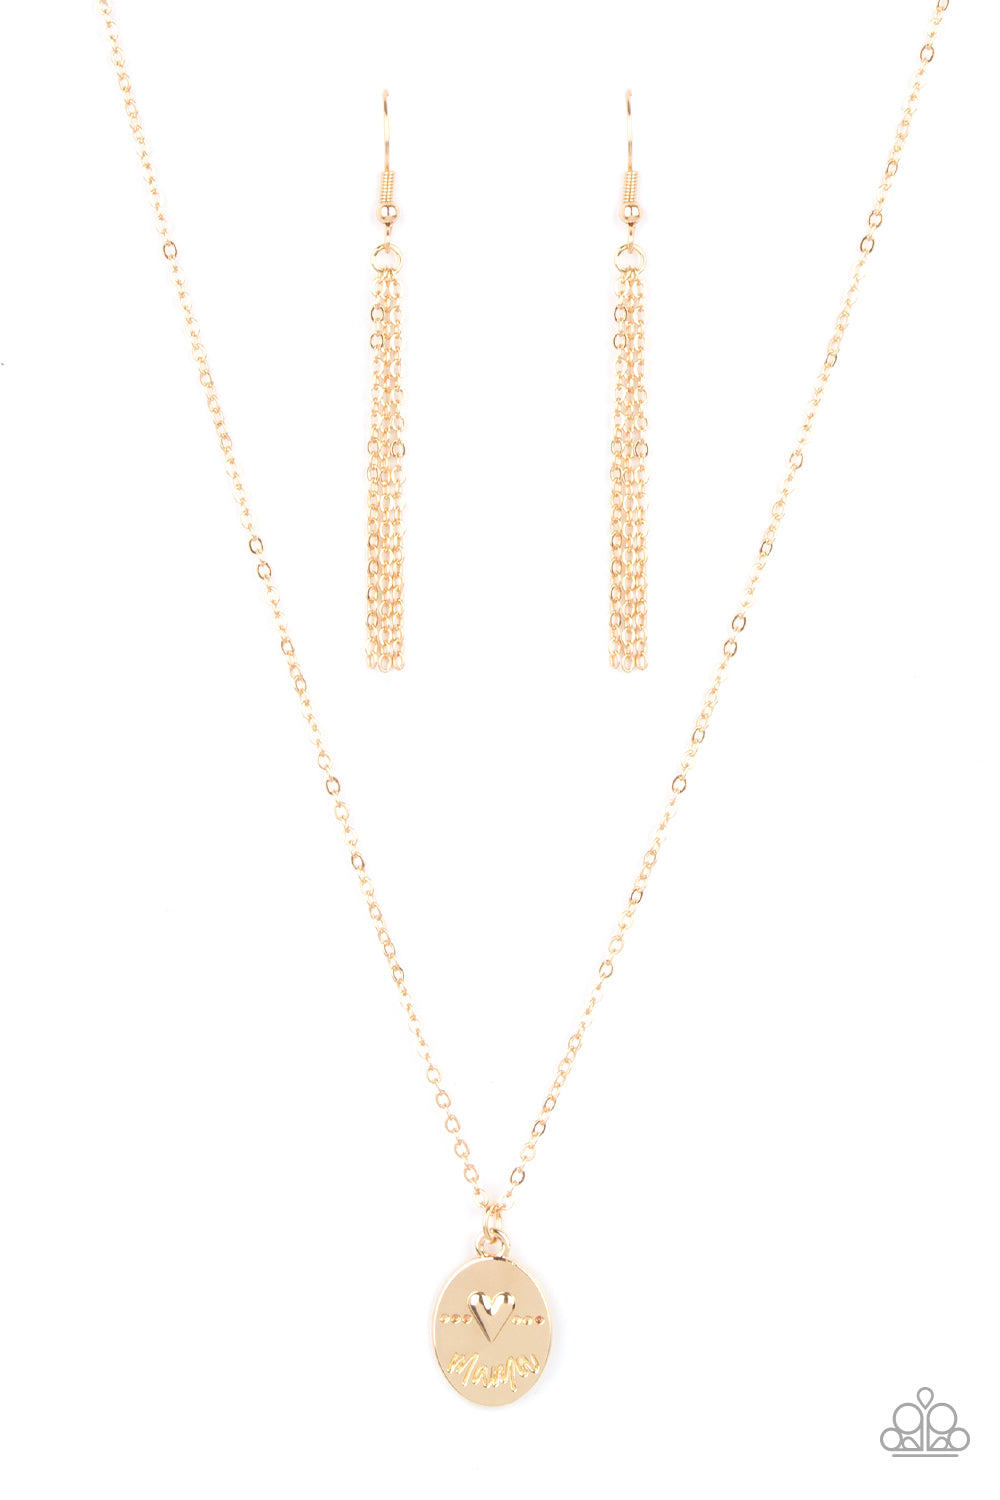 Paparazzi Accessories - They Call Me Mama #N85 - Gold Necklace